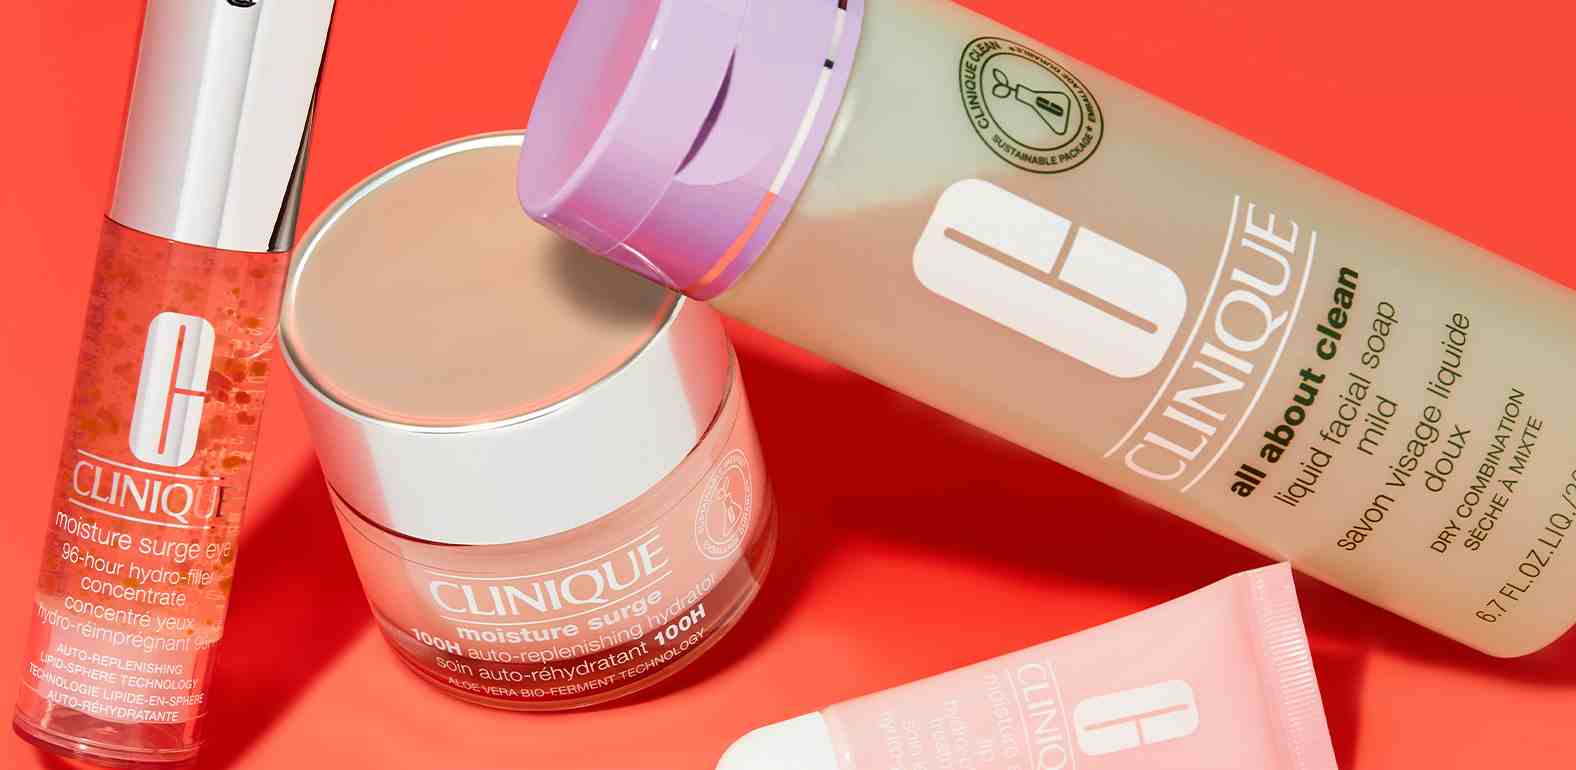 What Are Clinique Products? Do You Get Results? Pros & Cons.